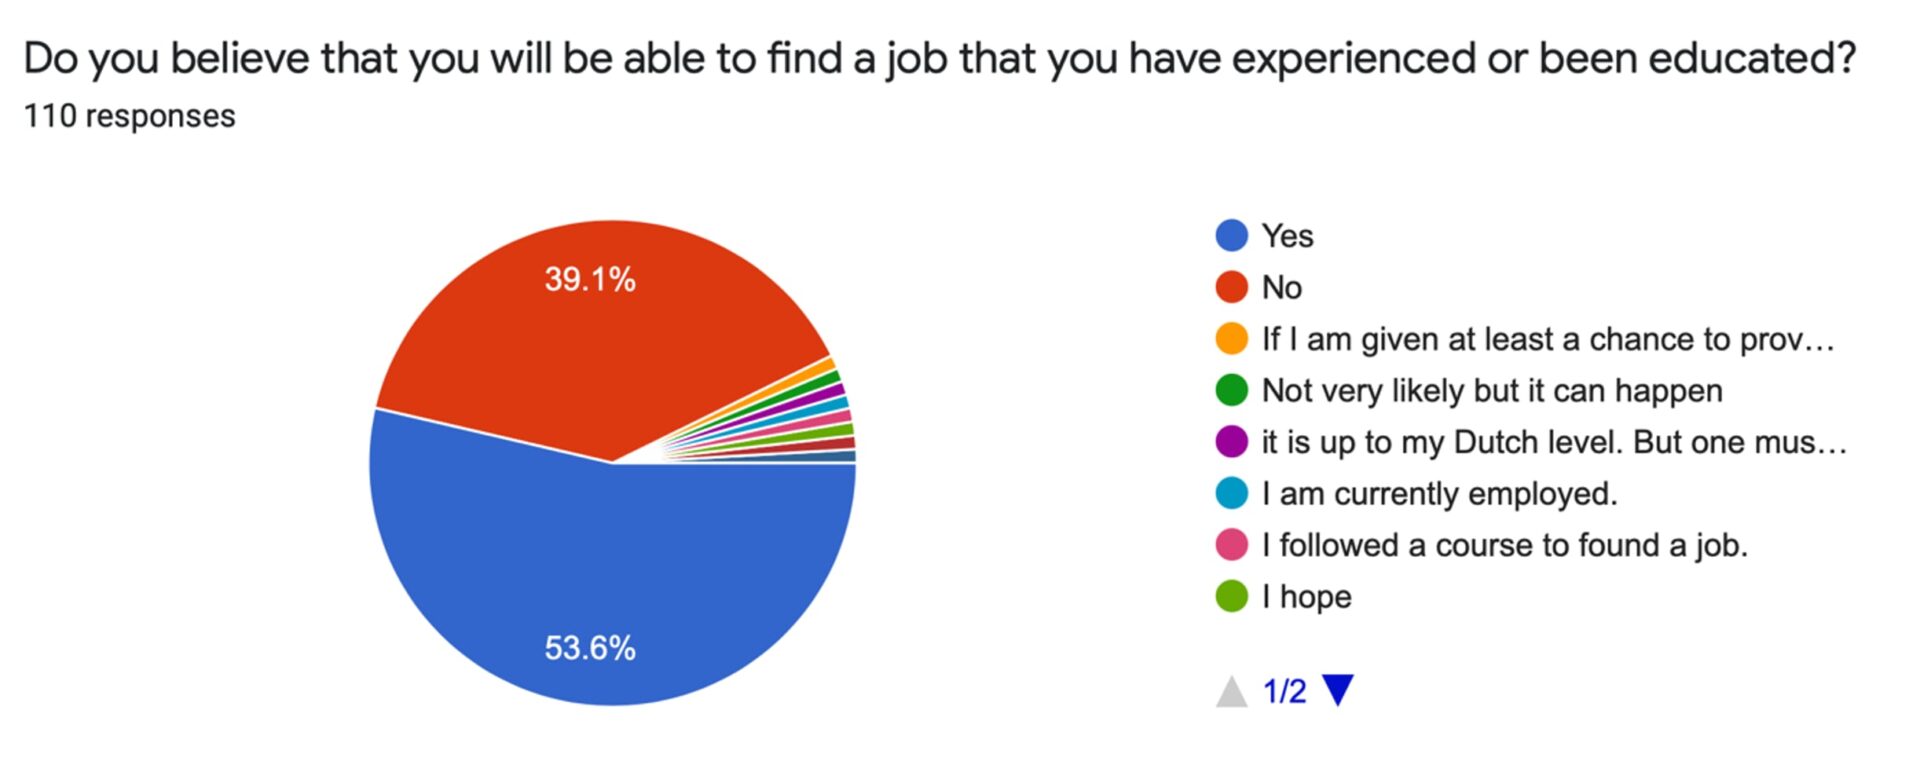 Figure 9. Expectation to find a job in line with education and experience